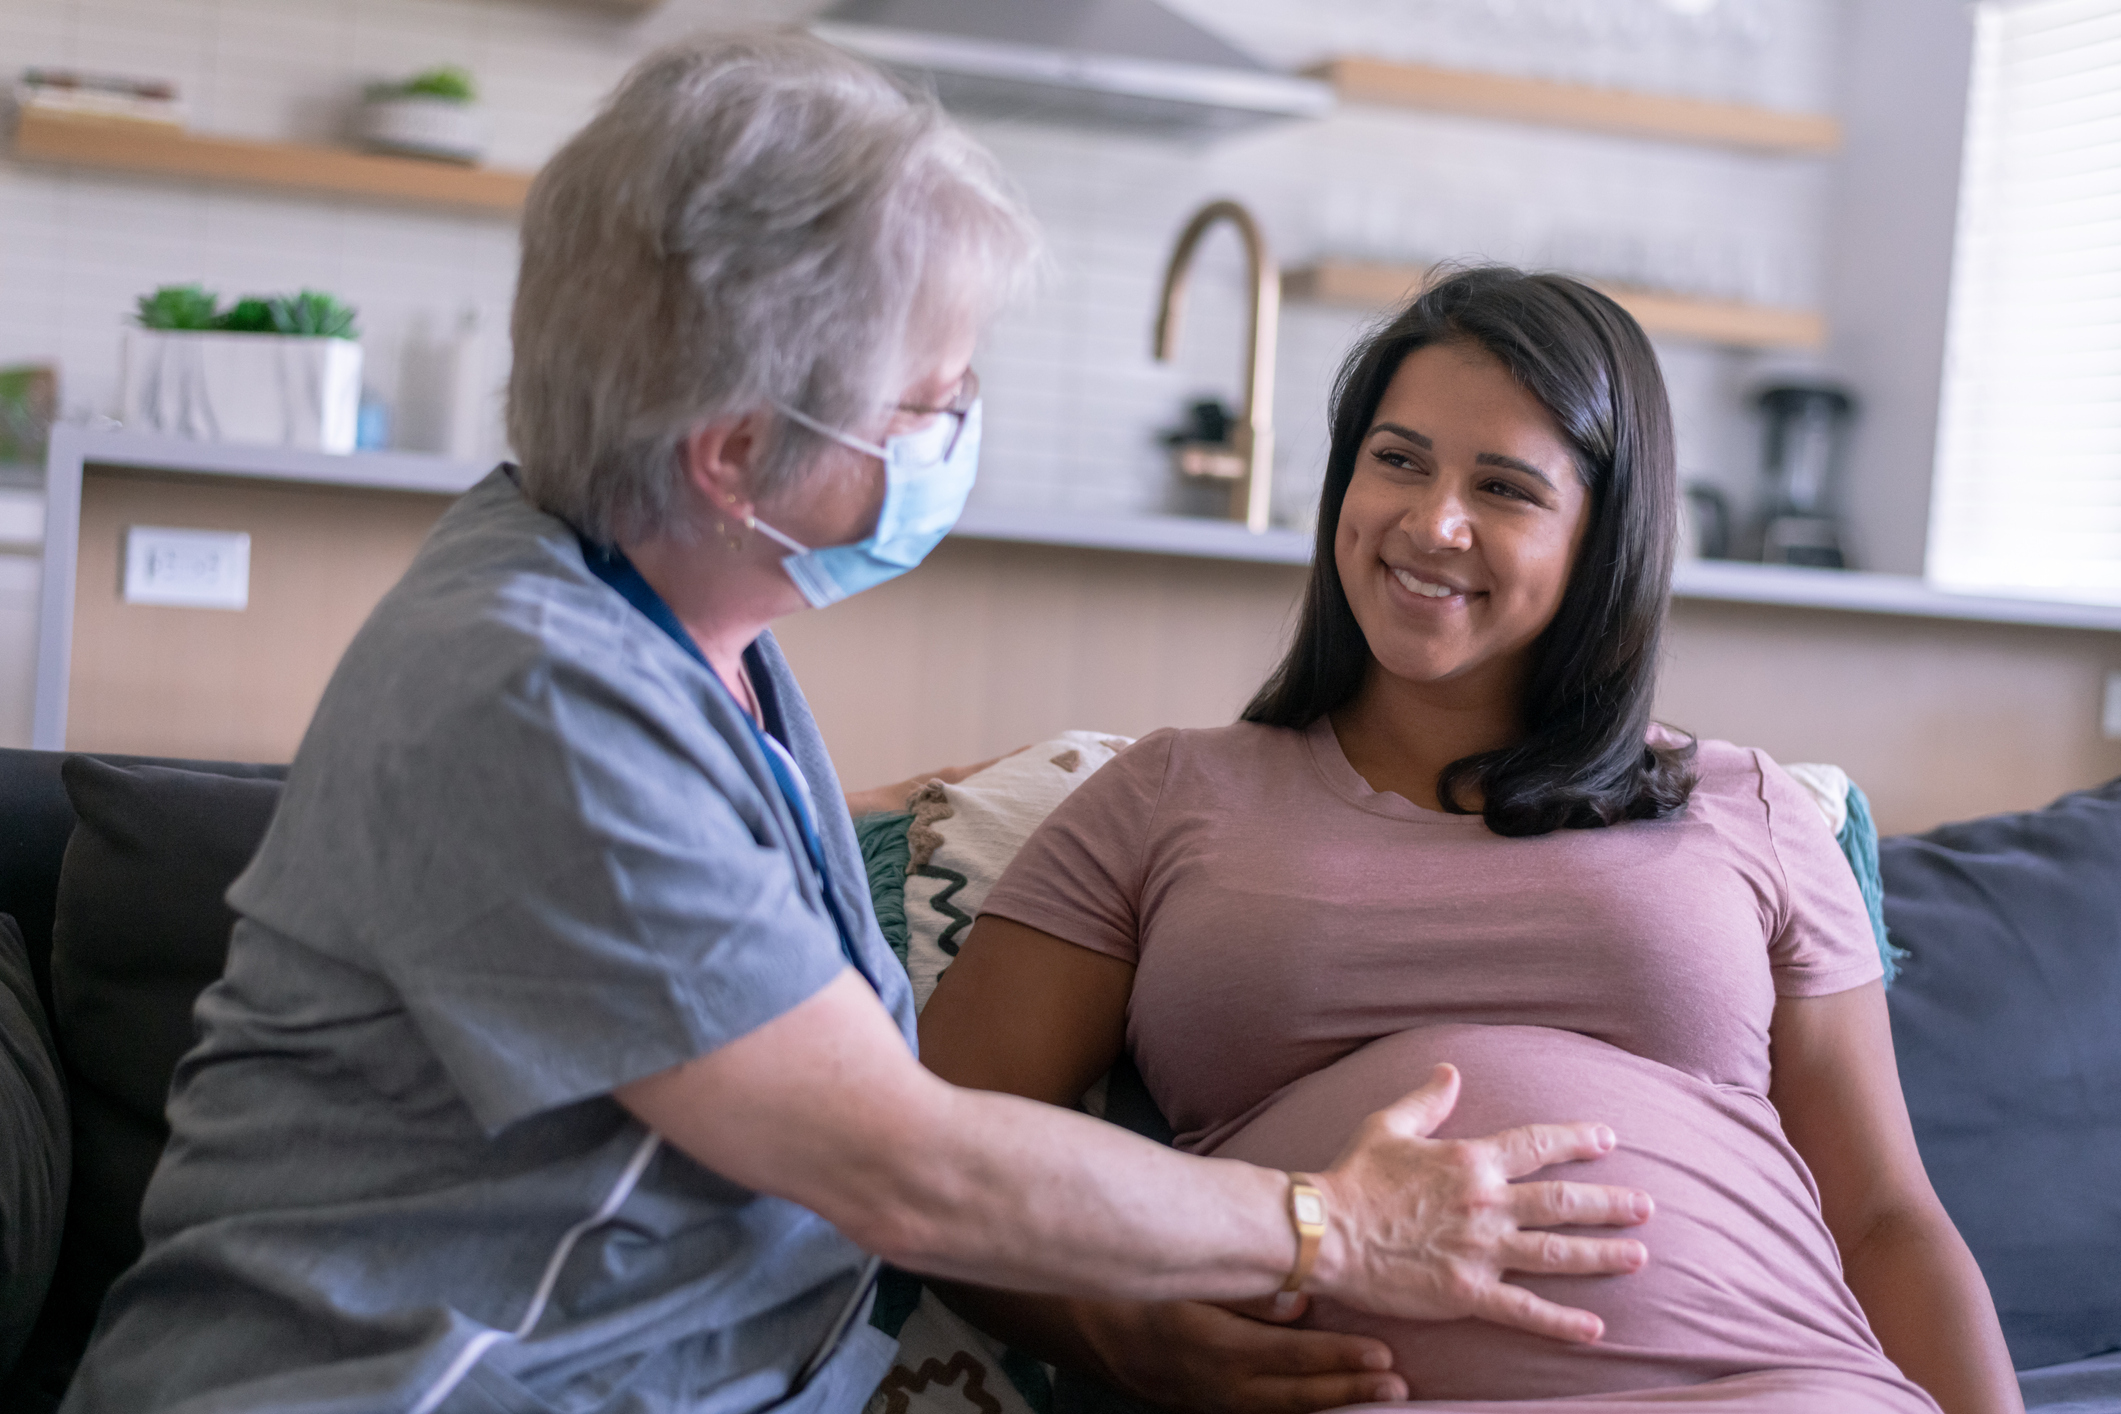 A beautiful young adult ethnic woman is pregnant and having an in-home medical check up with her nurse. The nurse is an older caucasian woman. She is checking the woman's belly and has her hand placed on her stomach while wearing a surgical mask because of COVID-19.